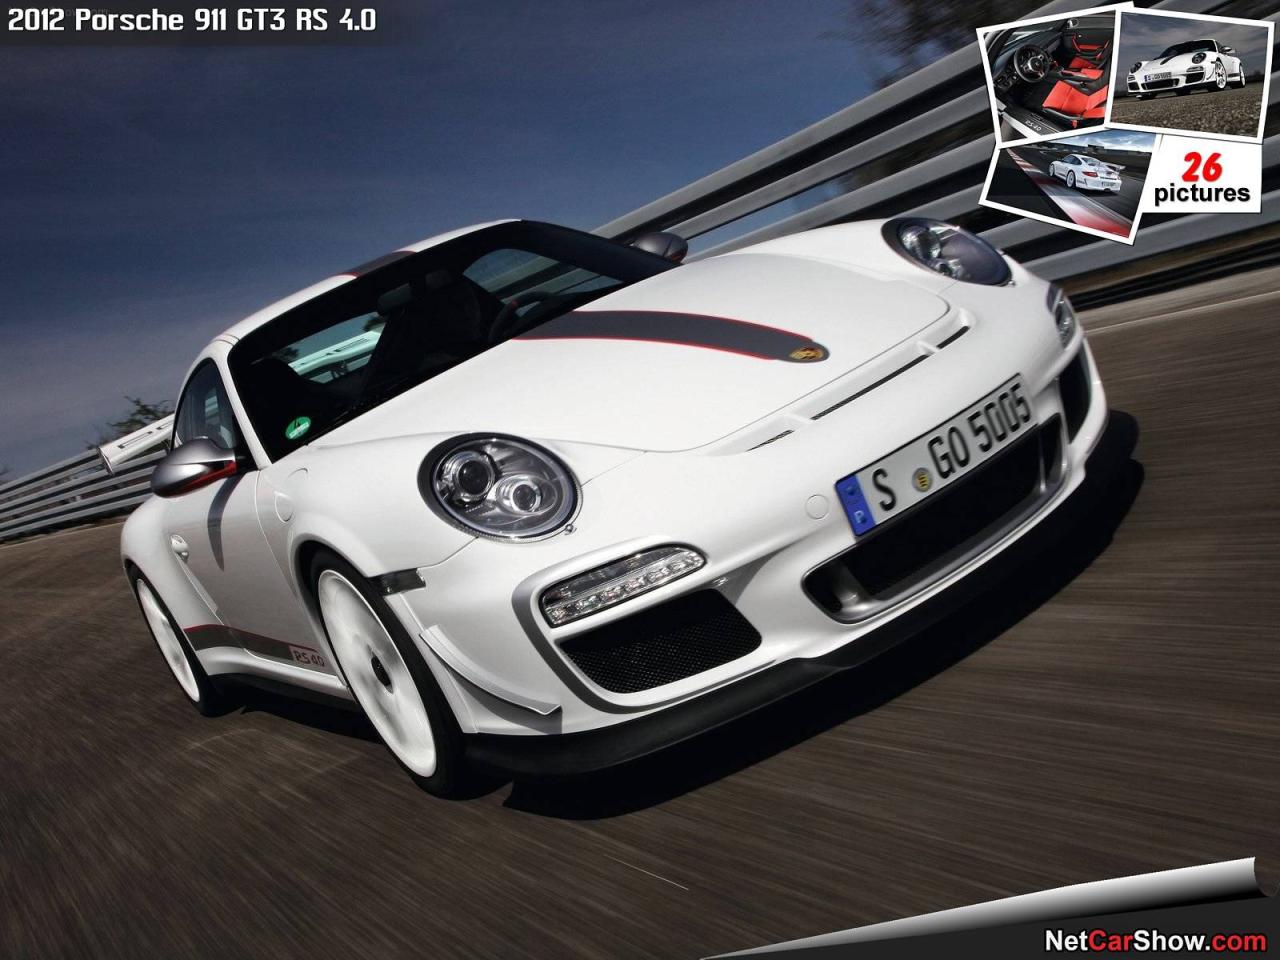 Why The 997 Porsche 911 GT3 RS 4.0 Is A True Unicorn Among Sports Cars